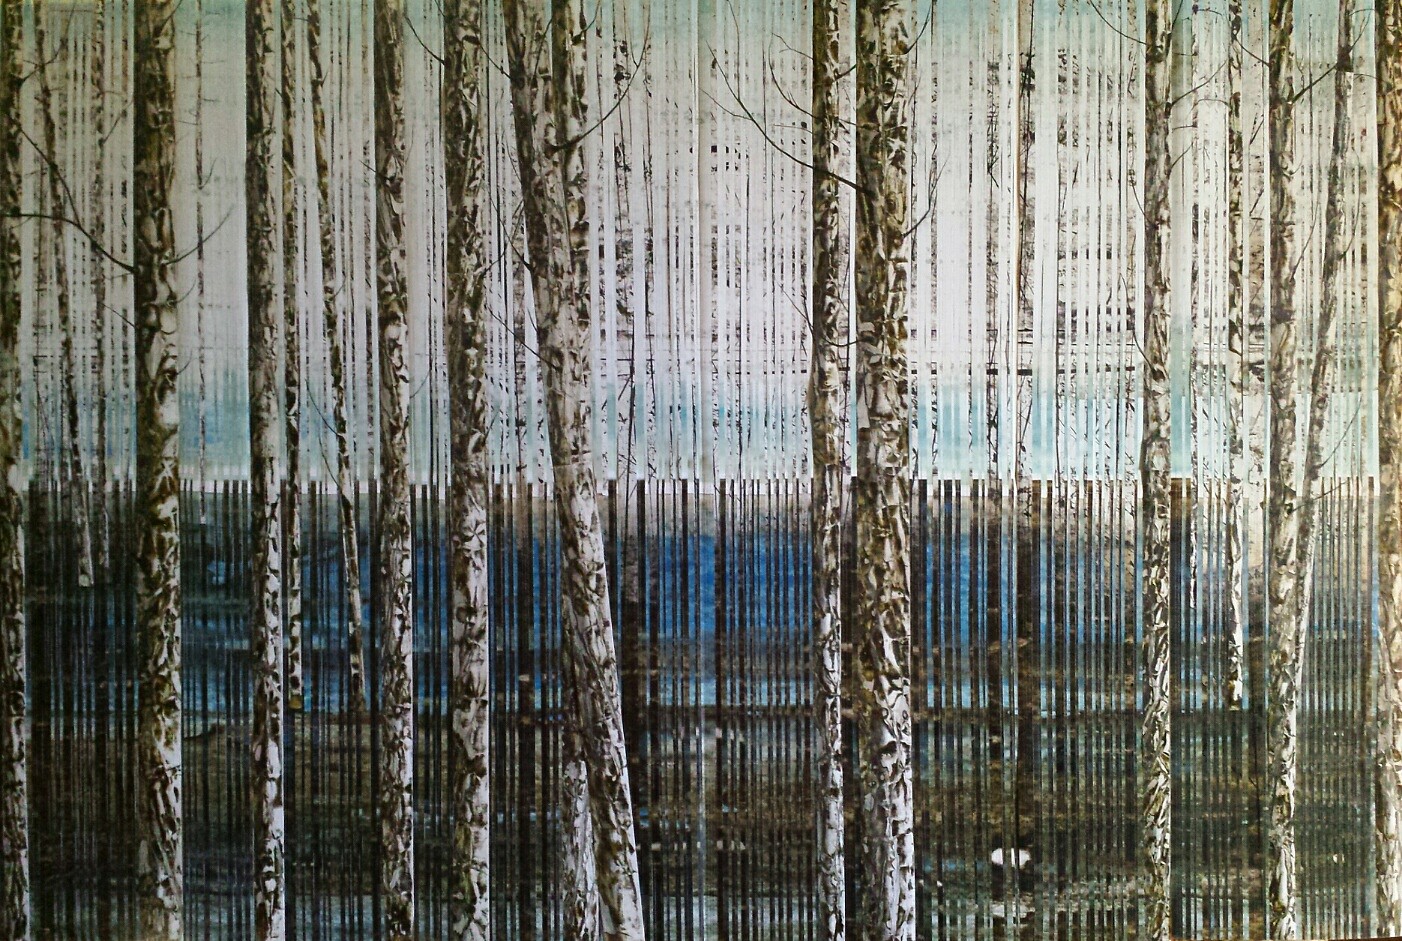 Anastasia Kimmett, Through the Lodgepoles
Oil Pastel, Acrylic Ink on Paper Mounted on Panel, 40 x 60 in.
5492
&bull;